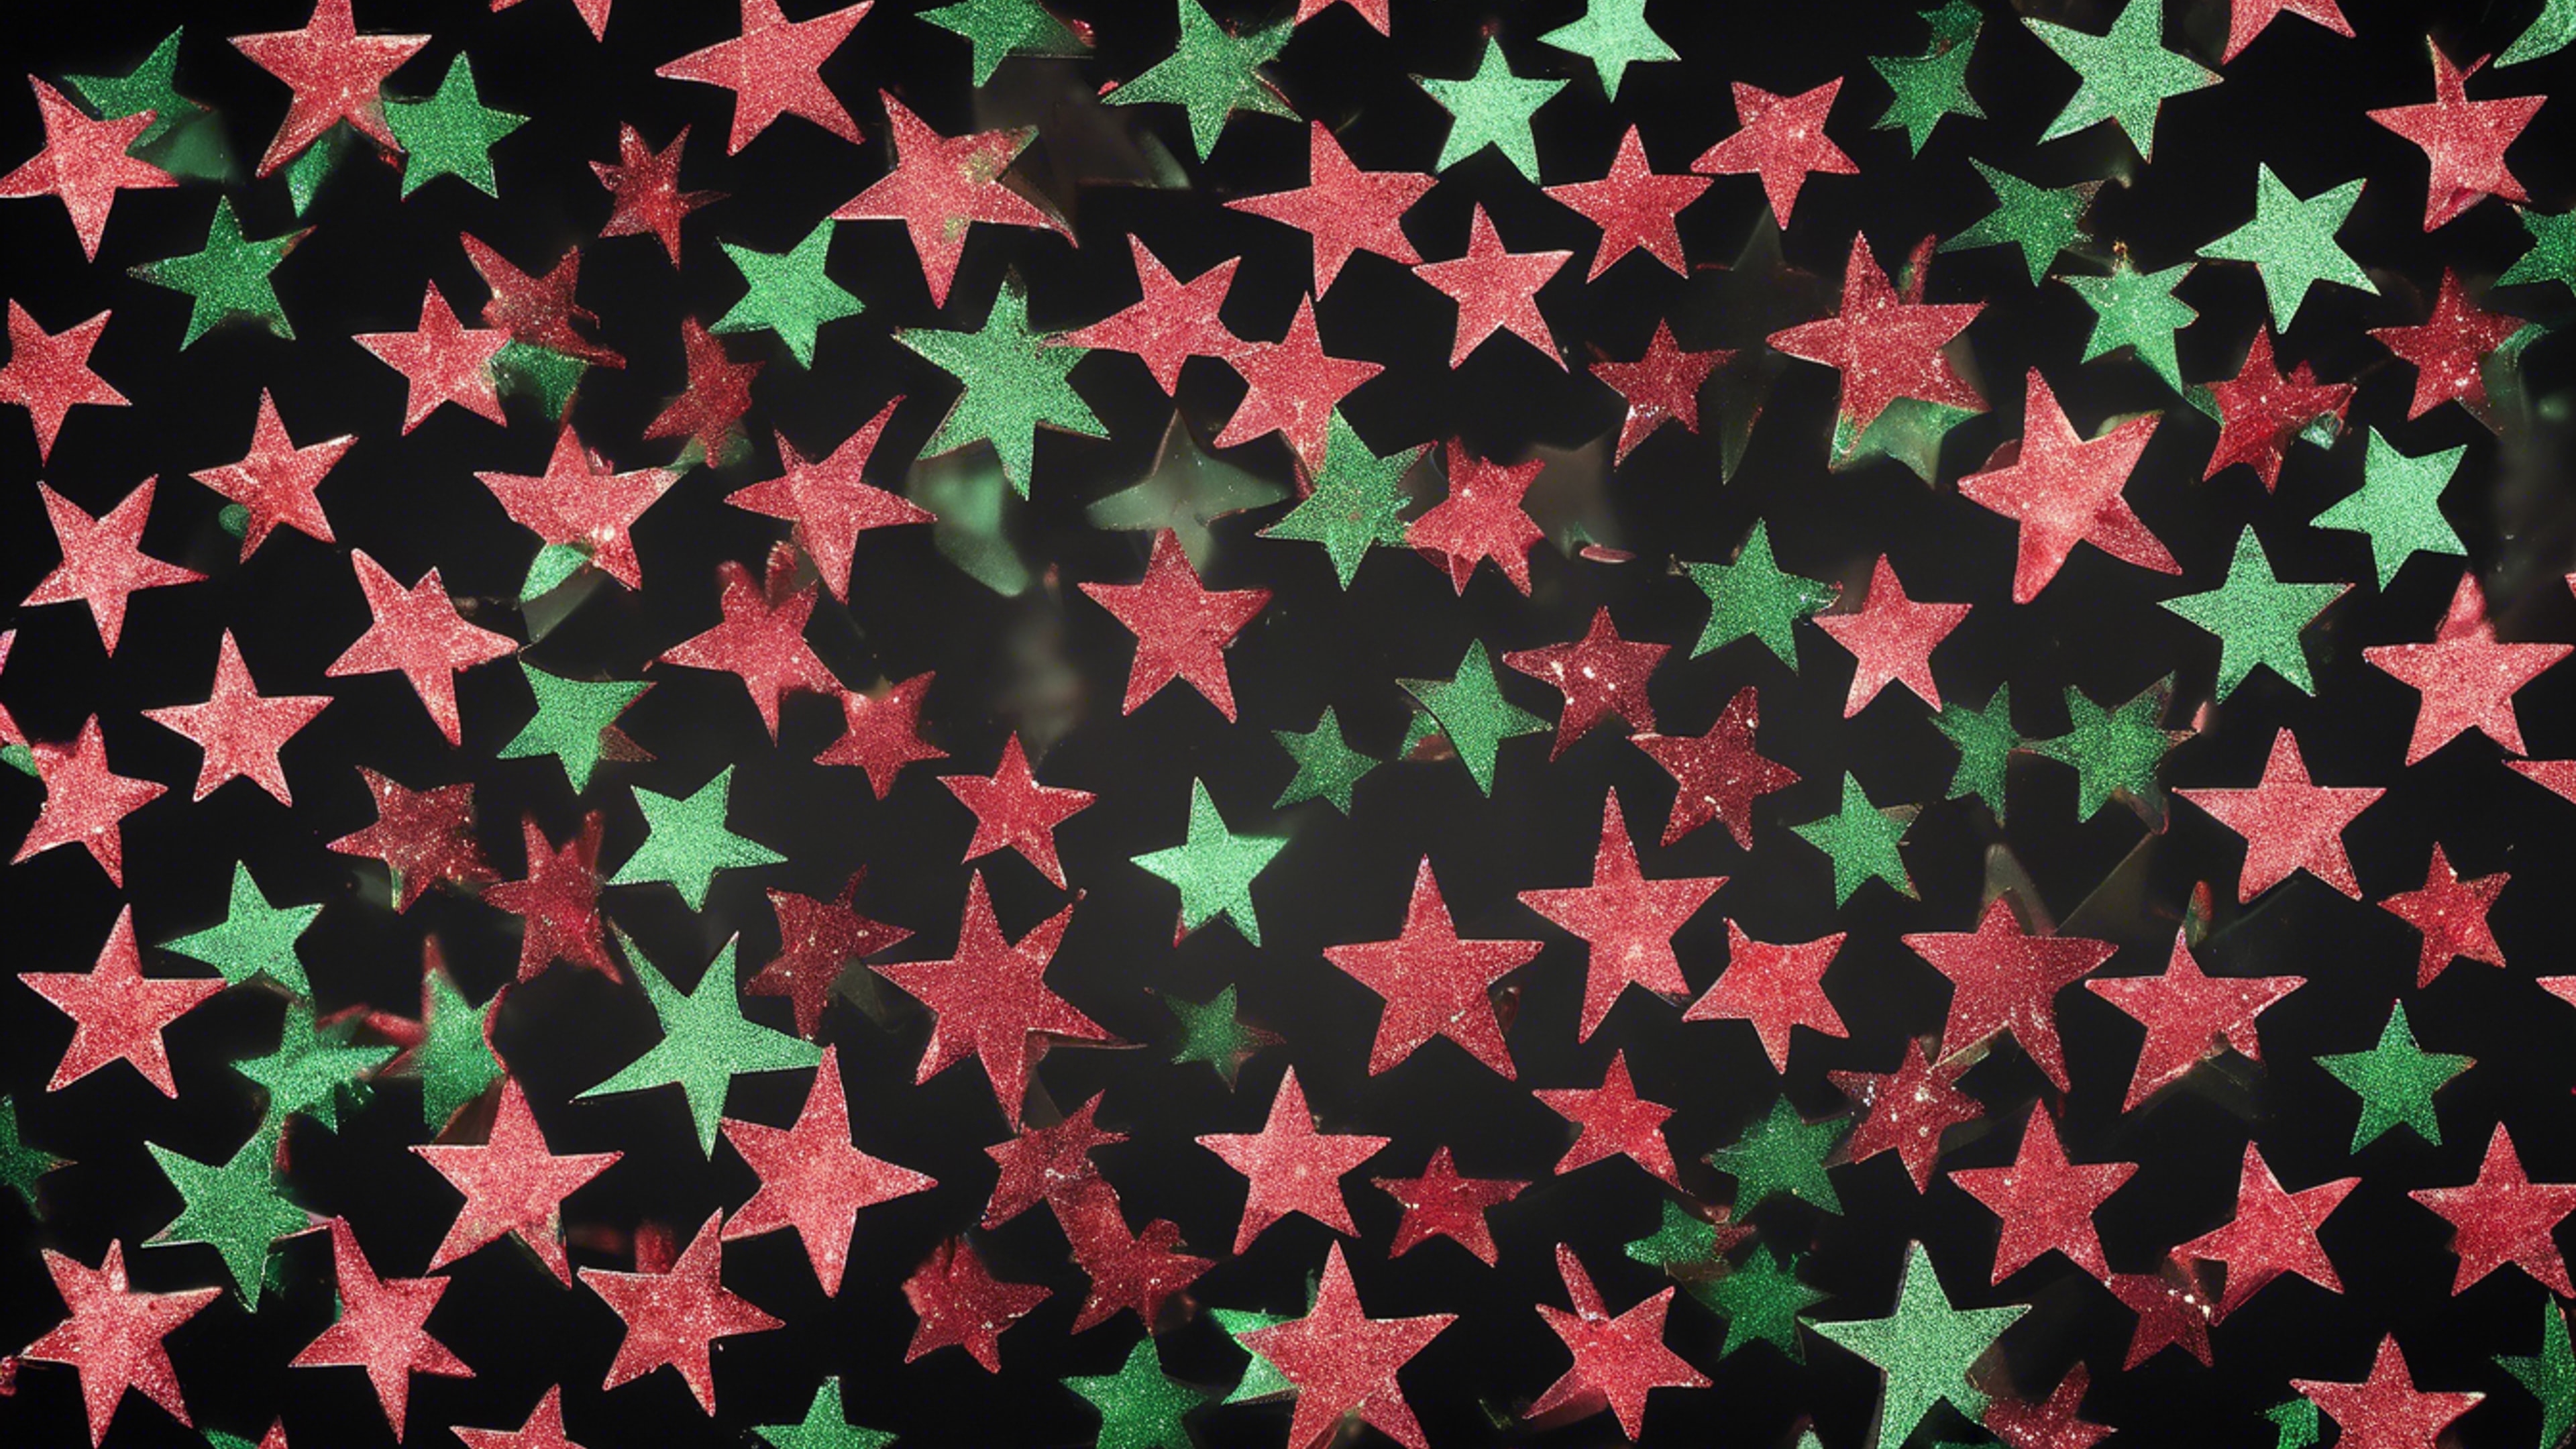 Green and red glitter forming star shapes on a black background Hintergrund[2fe752b5dc5f4f35ba35]